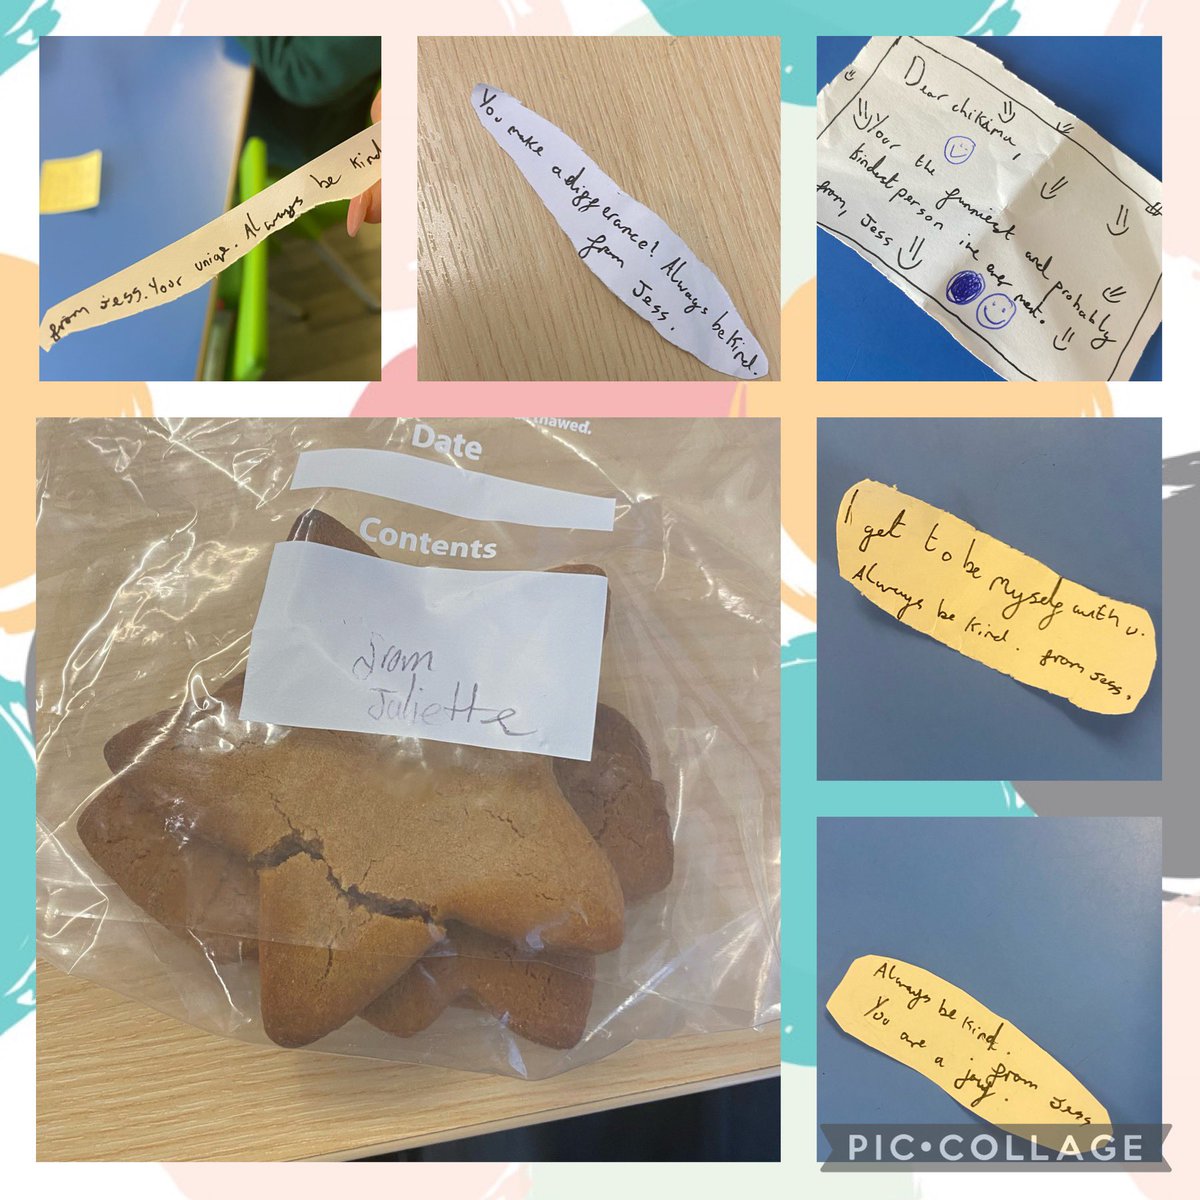 It’s clear that #WorldKindnessDay and #PositiveNoticingDay have had a lasting impact on those in class 9 as this morning staff were delivered some homemade Christmas cookies 👩🏼‍🍳 and the children also received compliments from another thoughtful class member 💛#SJSBsmsc